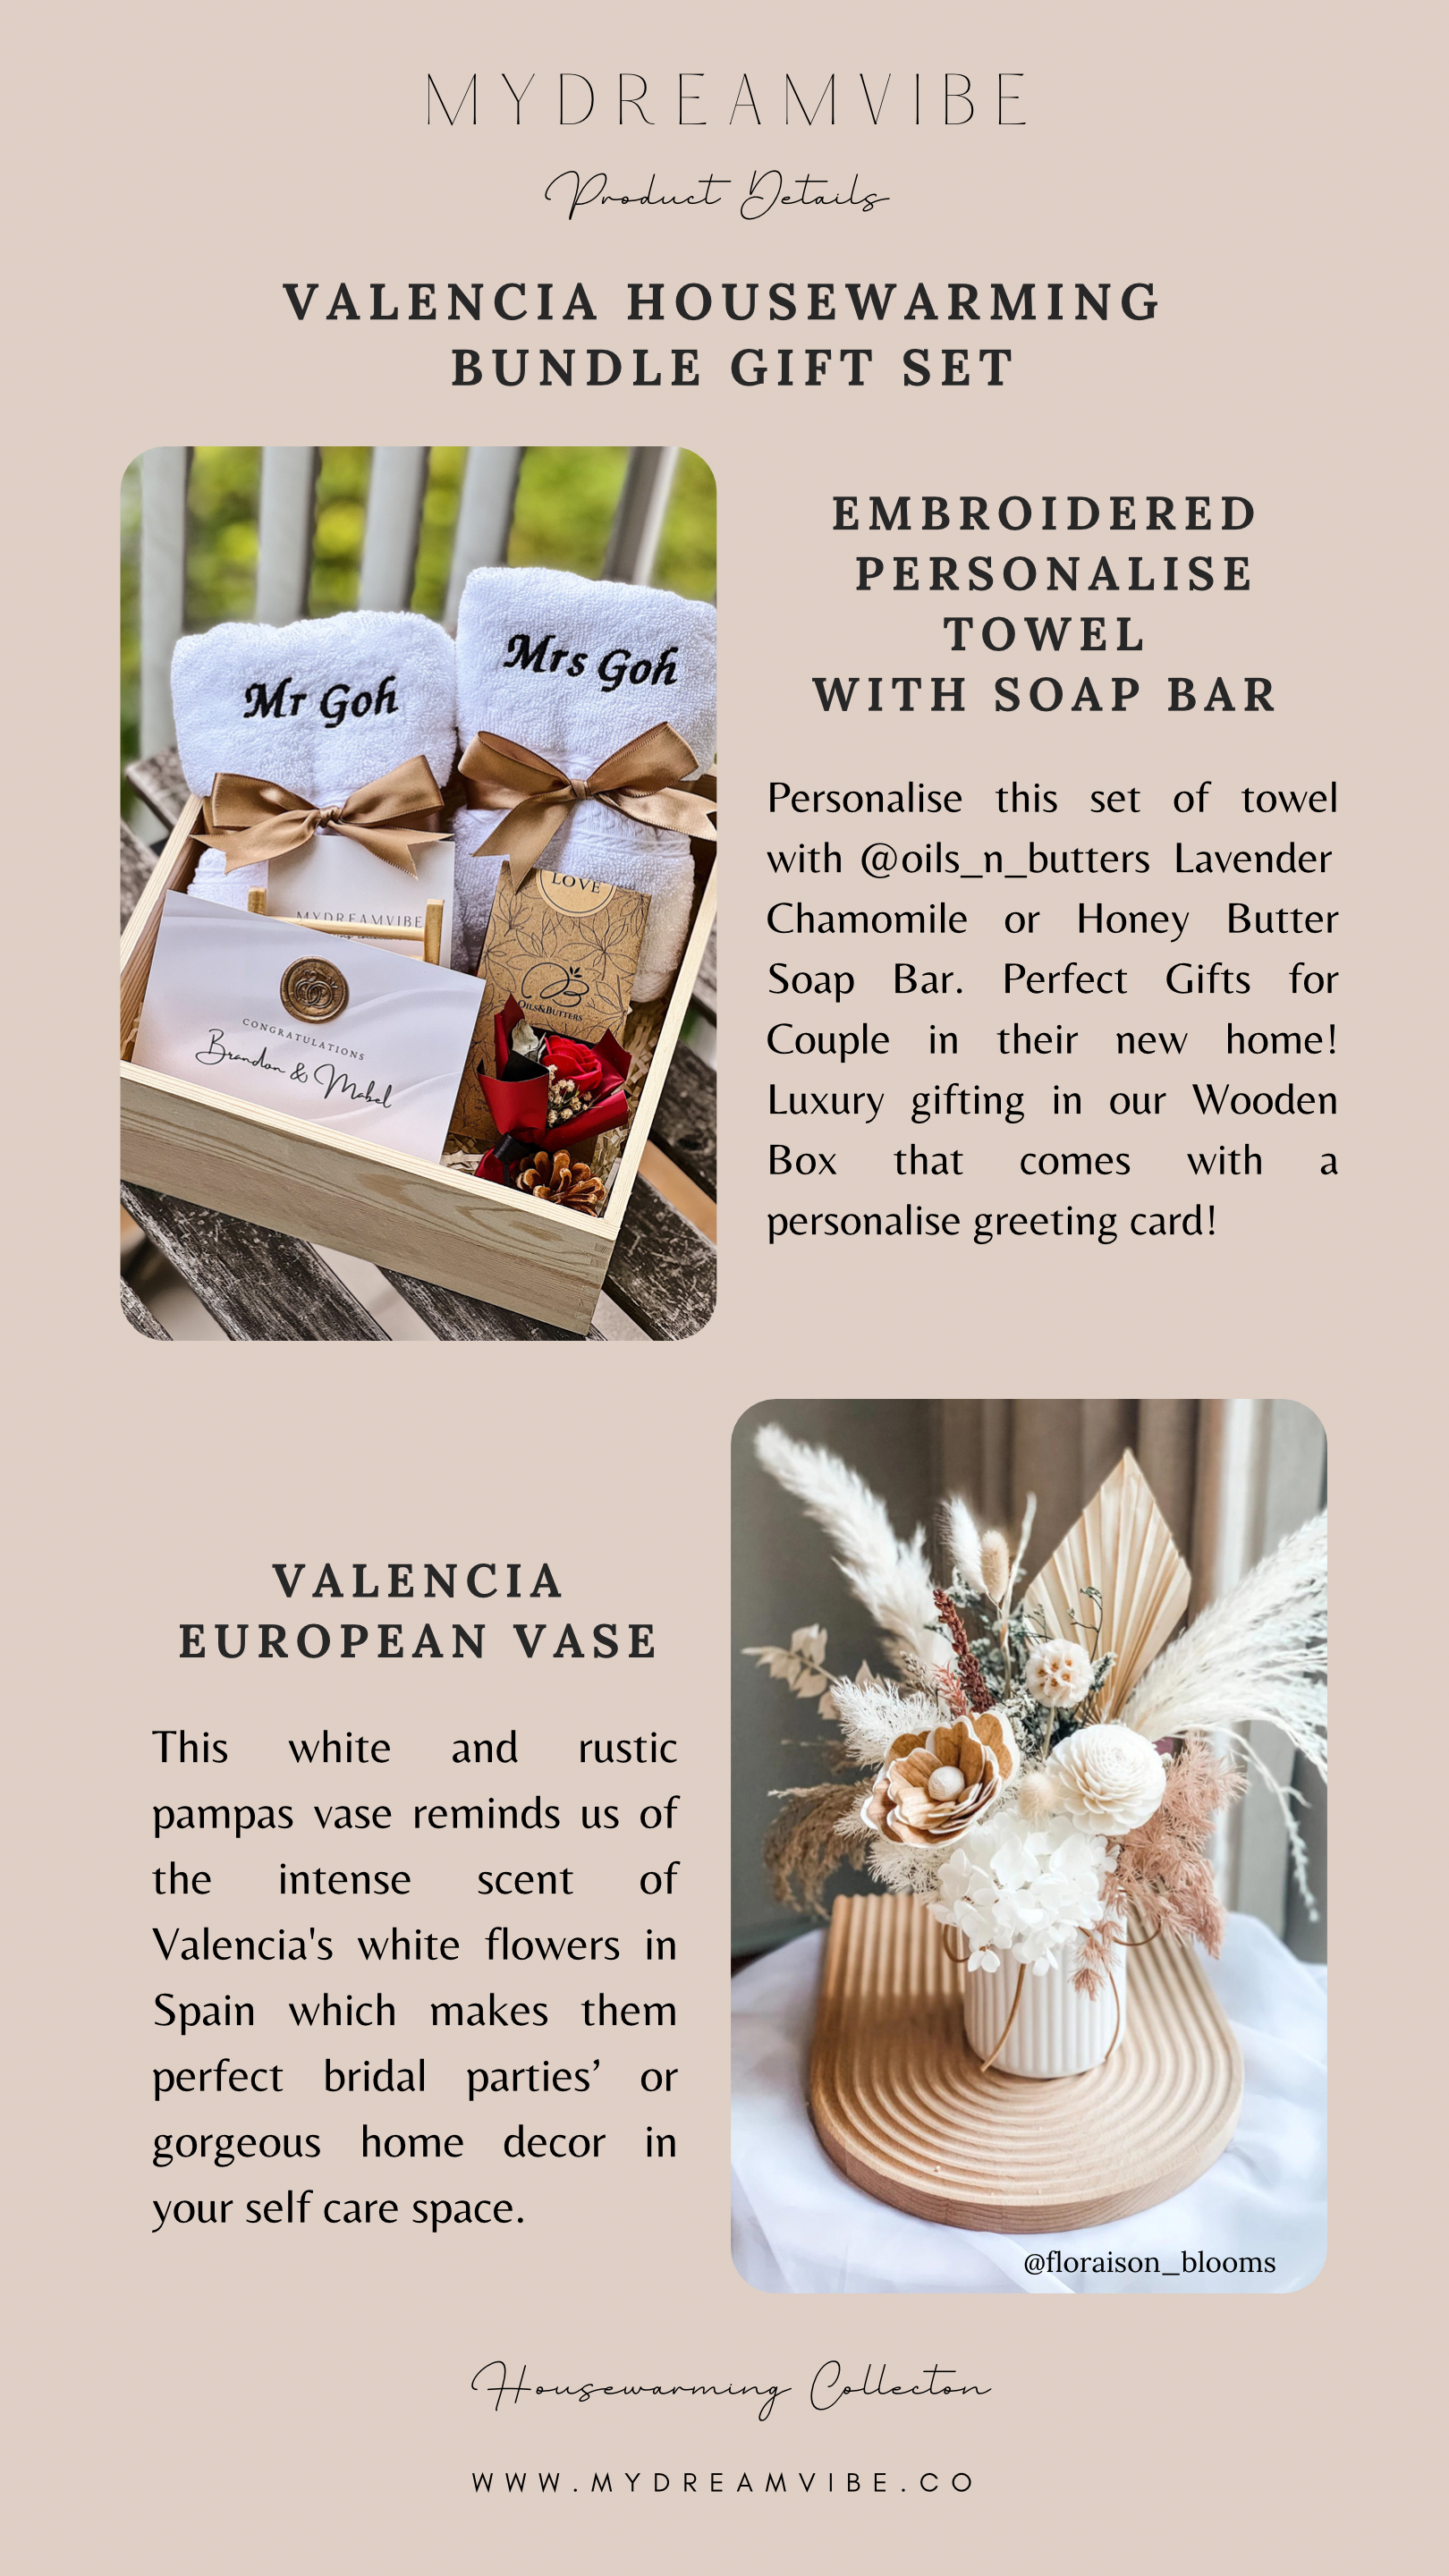 Housewarming Gift - Valencia with Embroidered Towel and Soap Bar-MyDreamVibe.Co